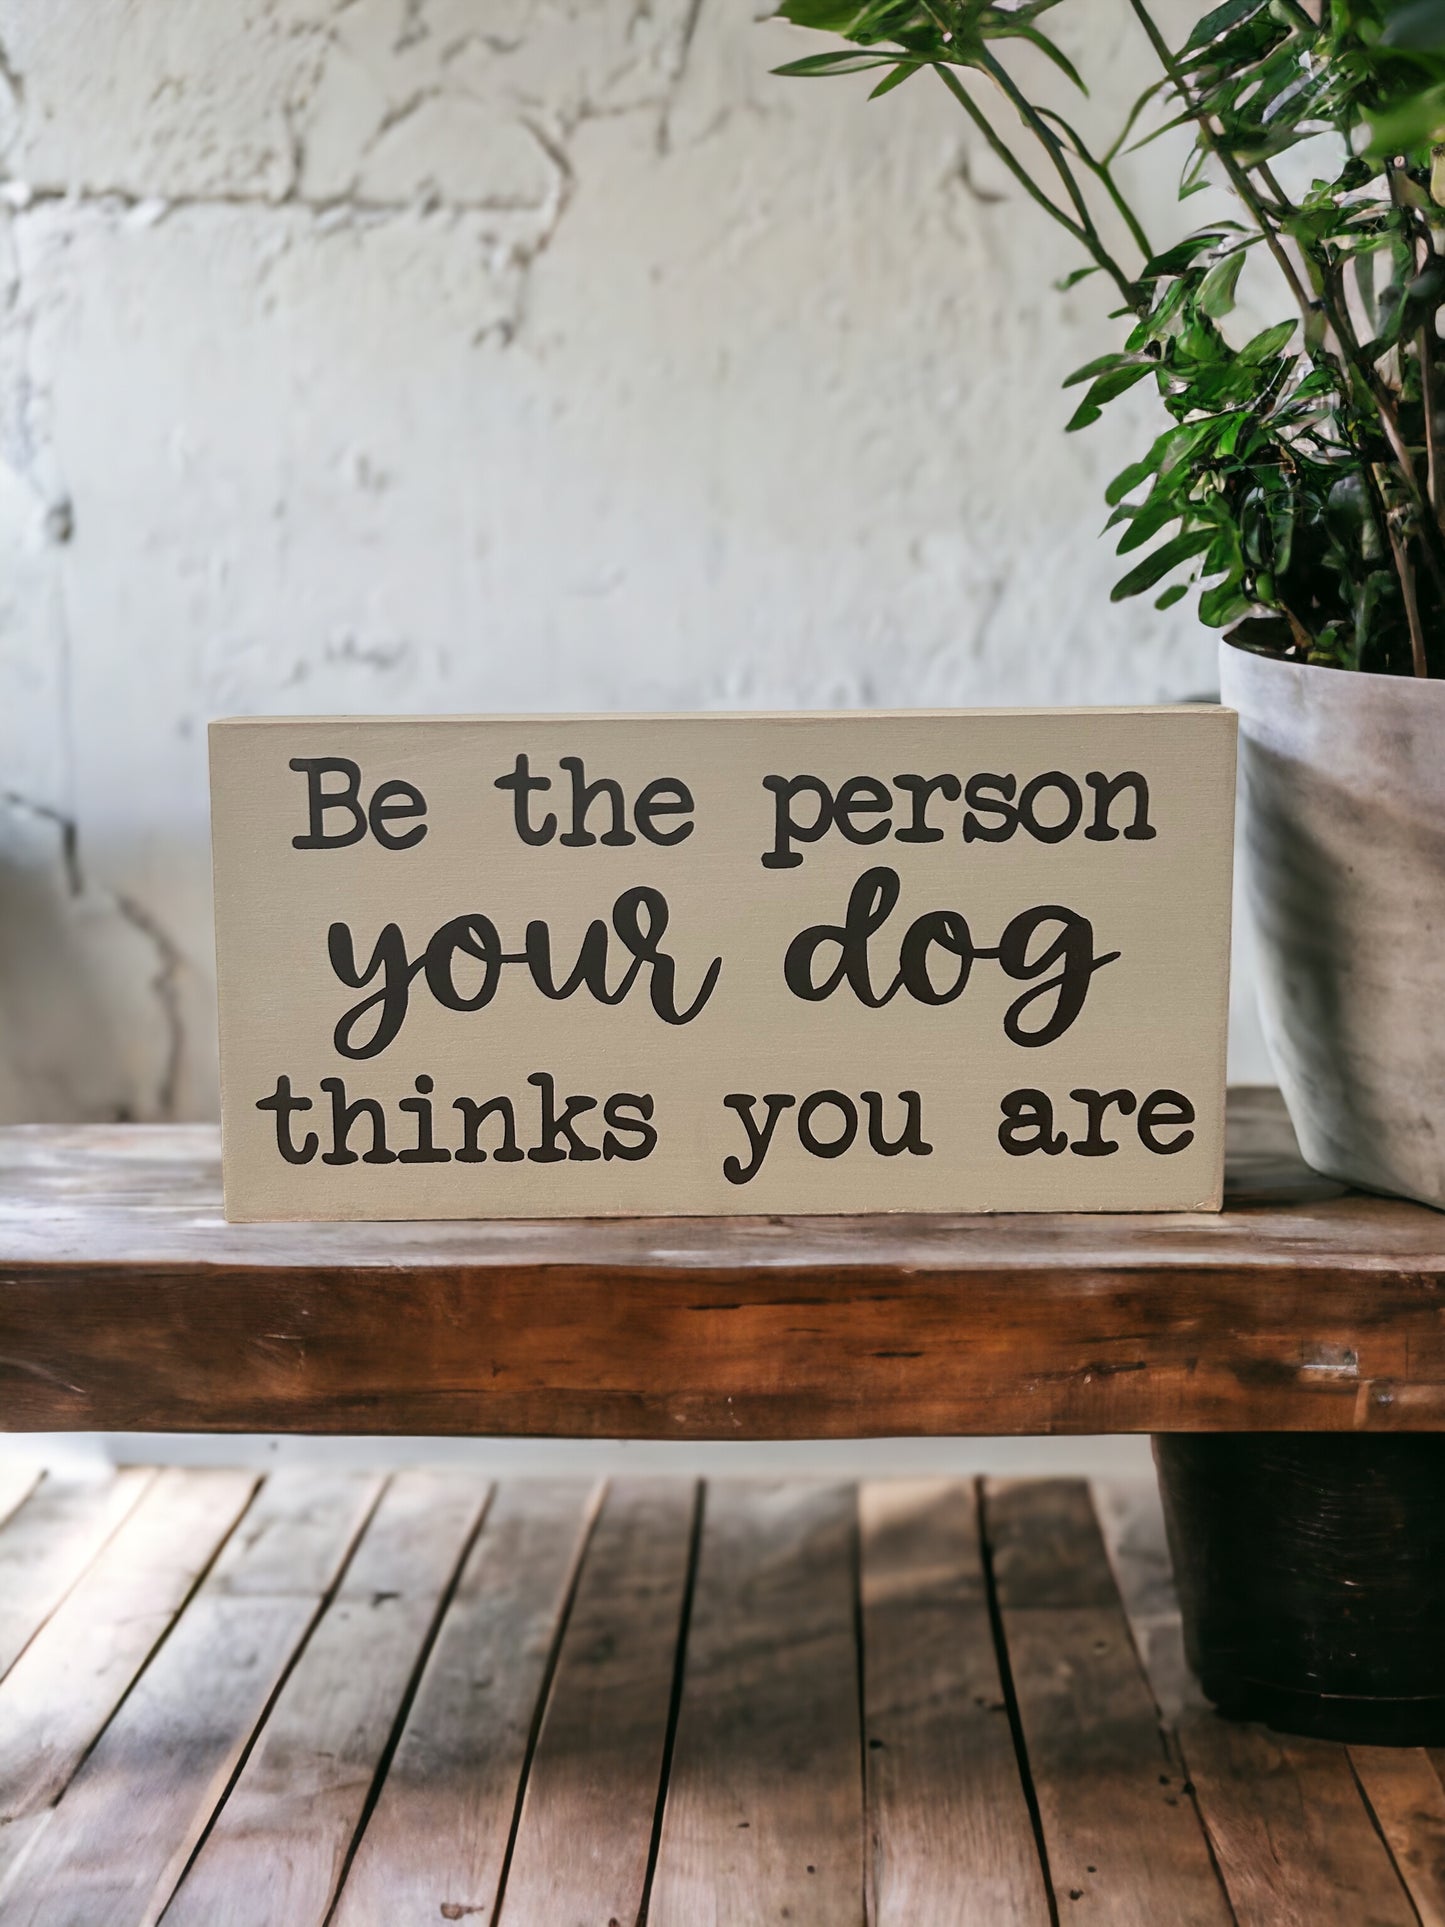 "Be the person your dog thinks you are" wood sign